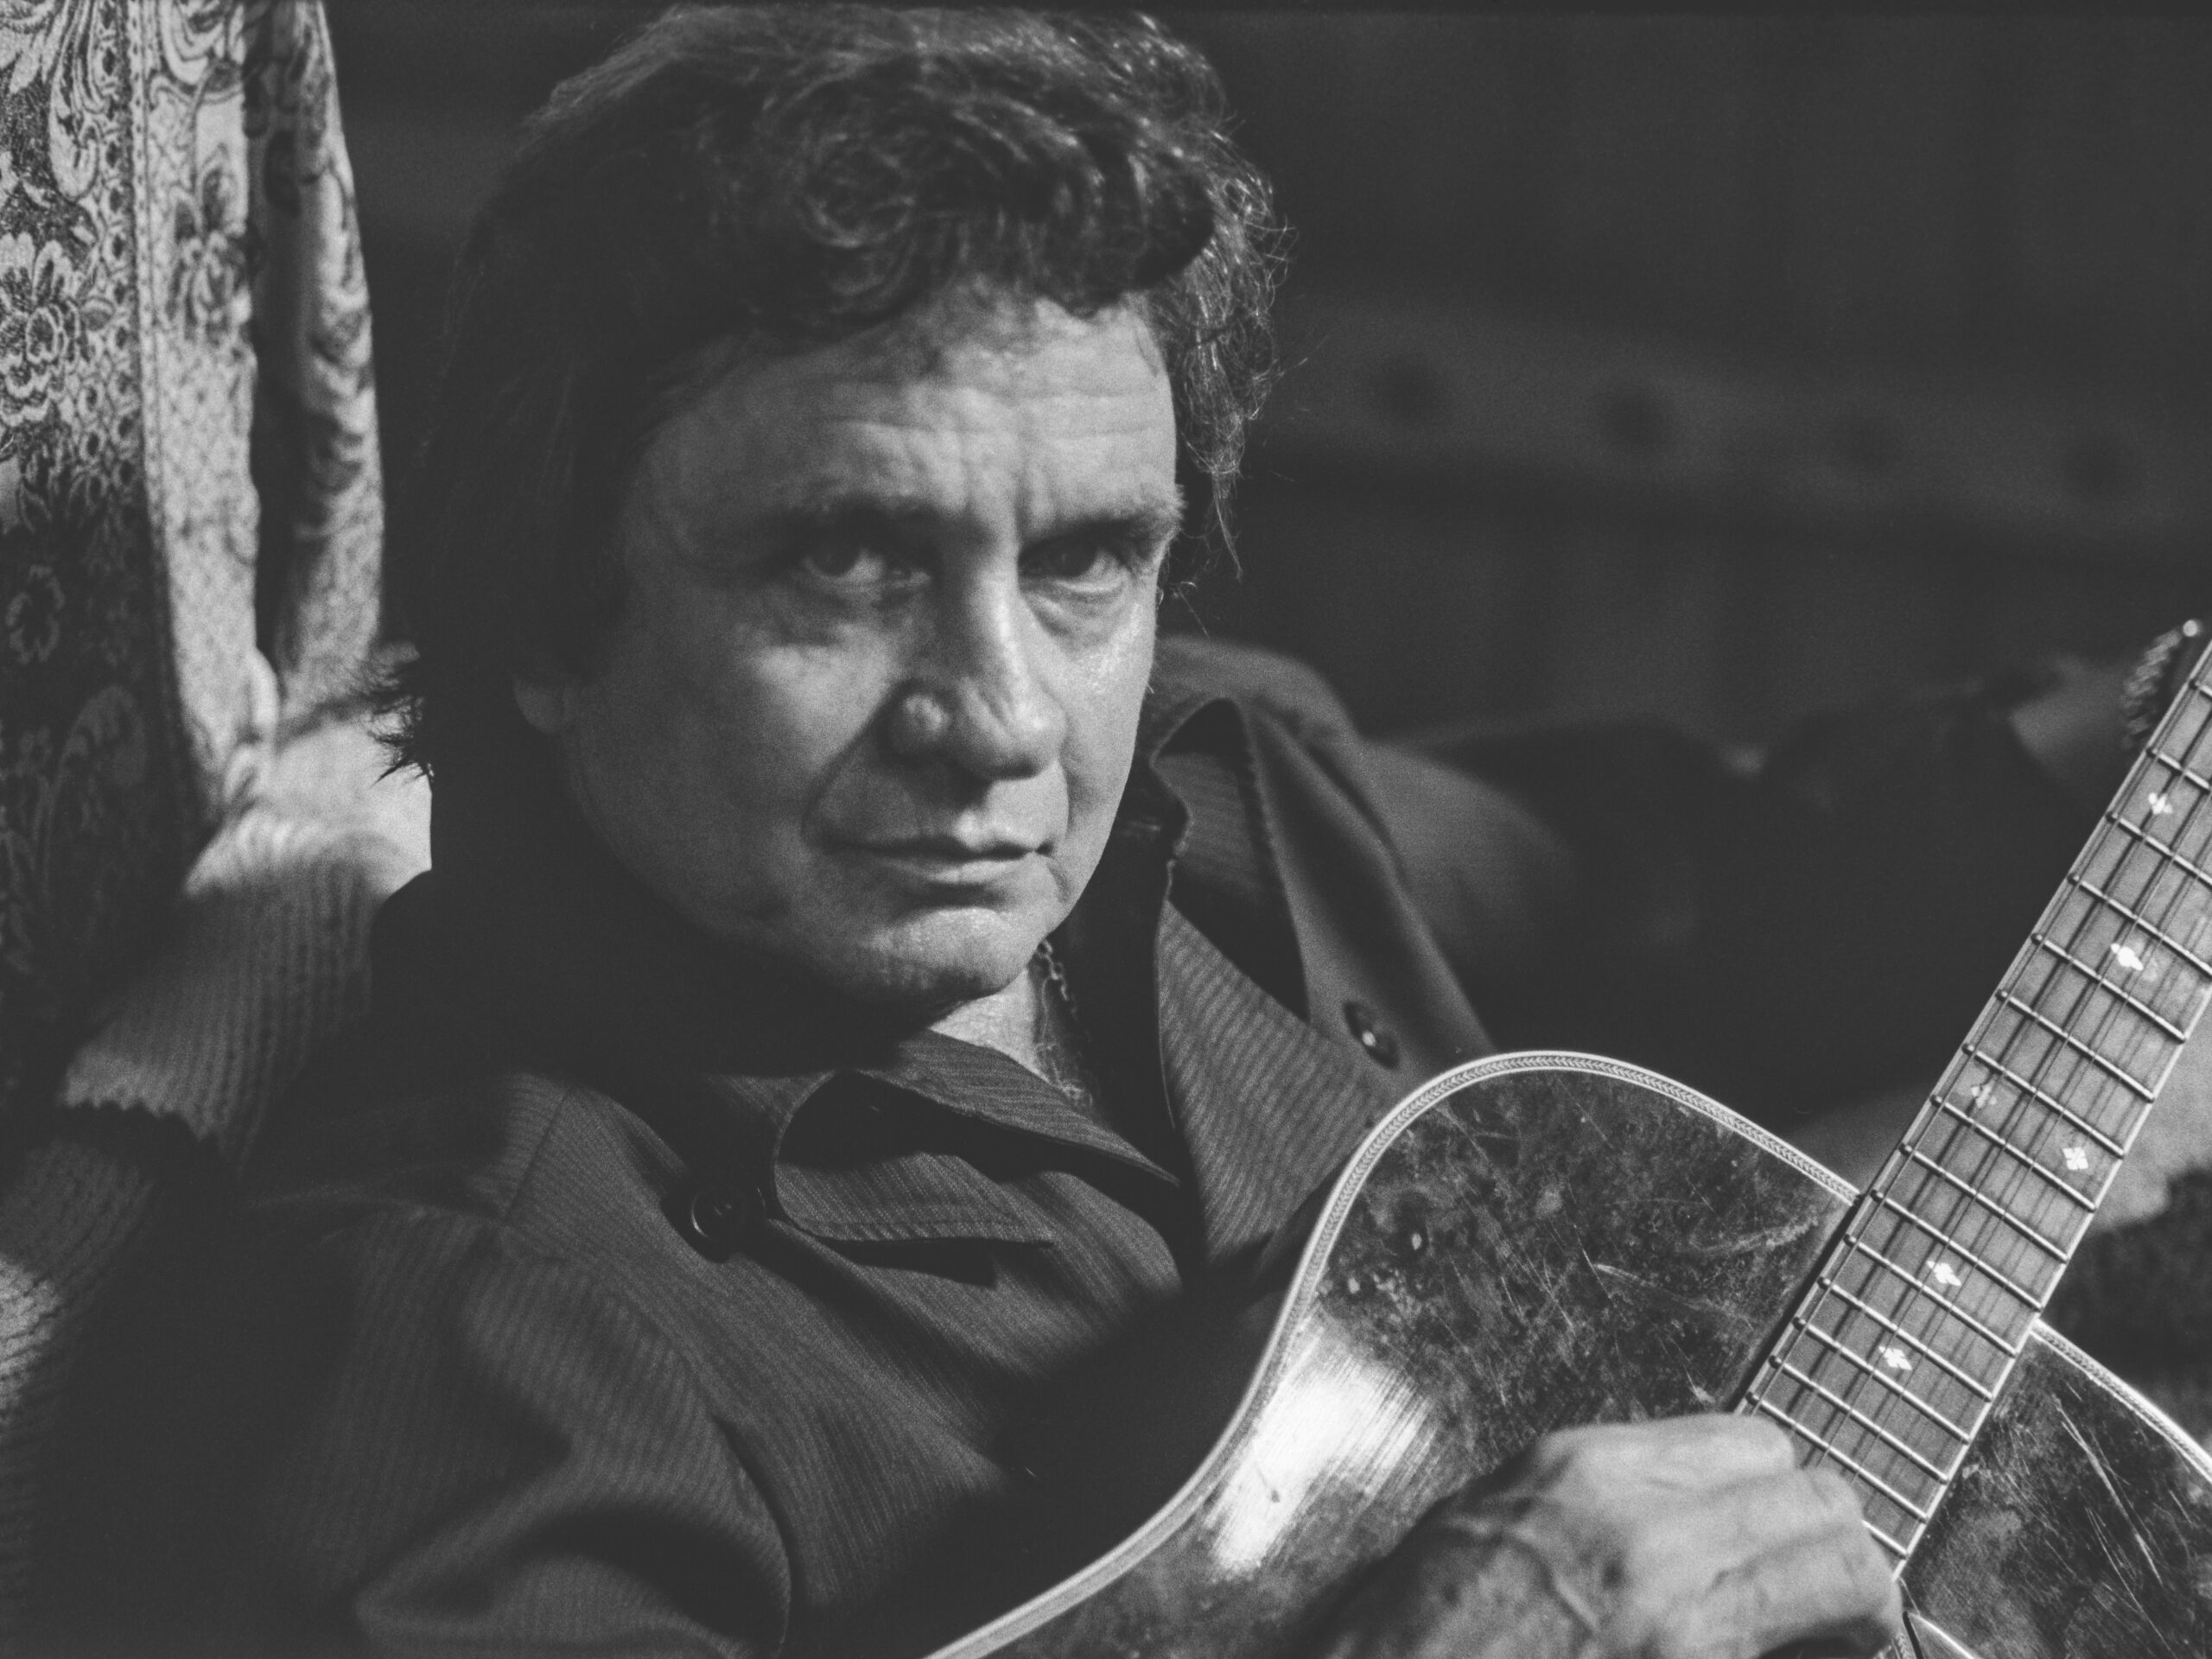 Songwriter, out June 28, features early '90s demos by Johnny Cash with new backing tracks.